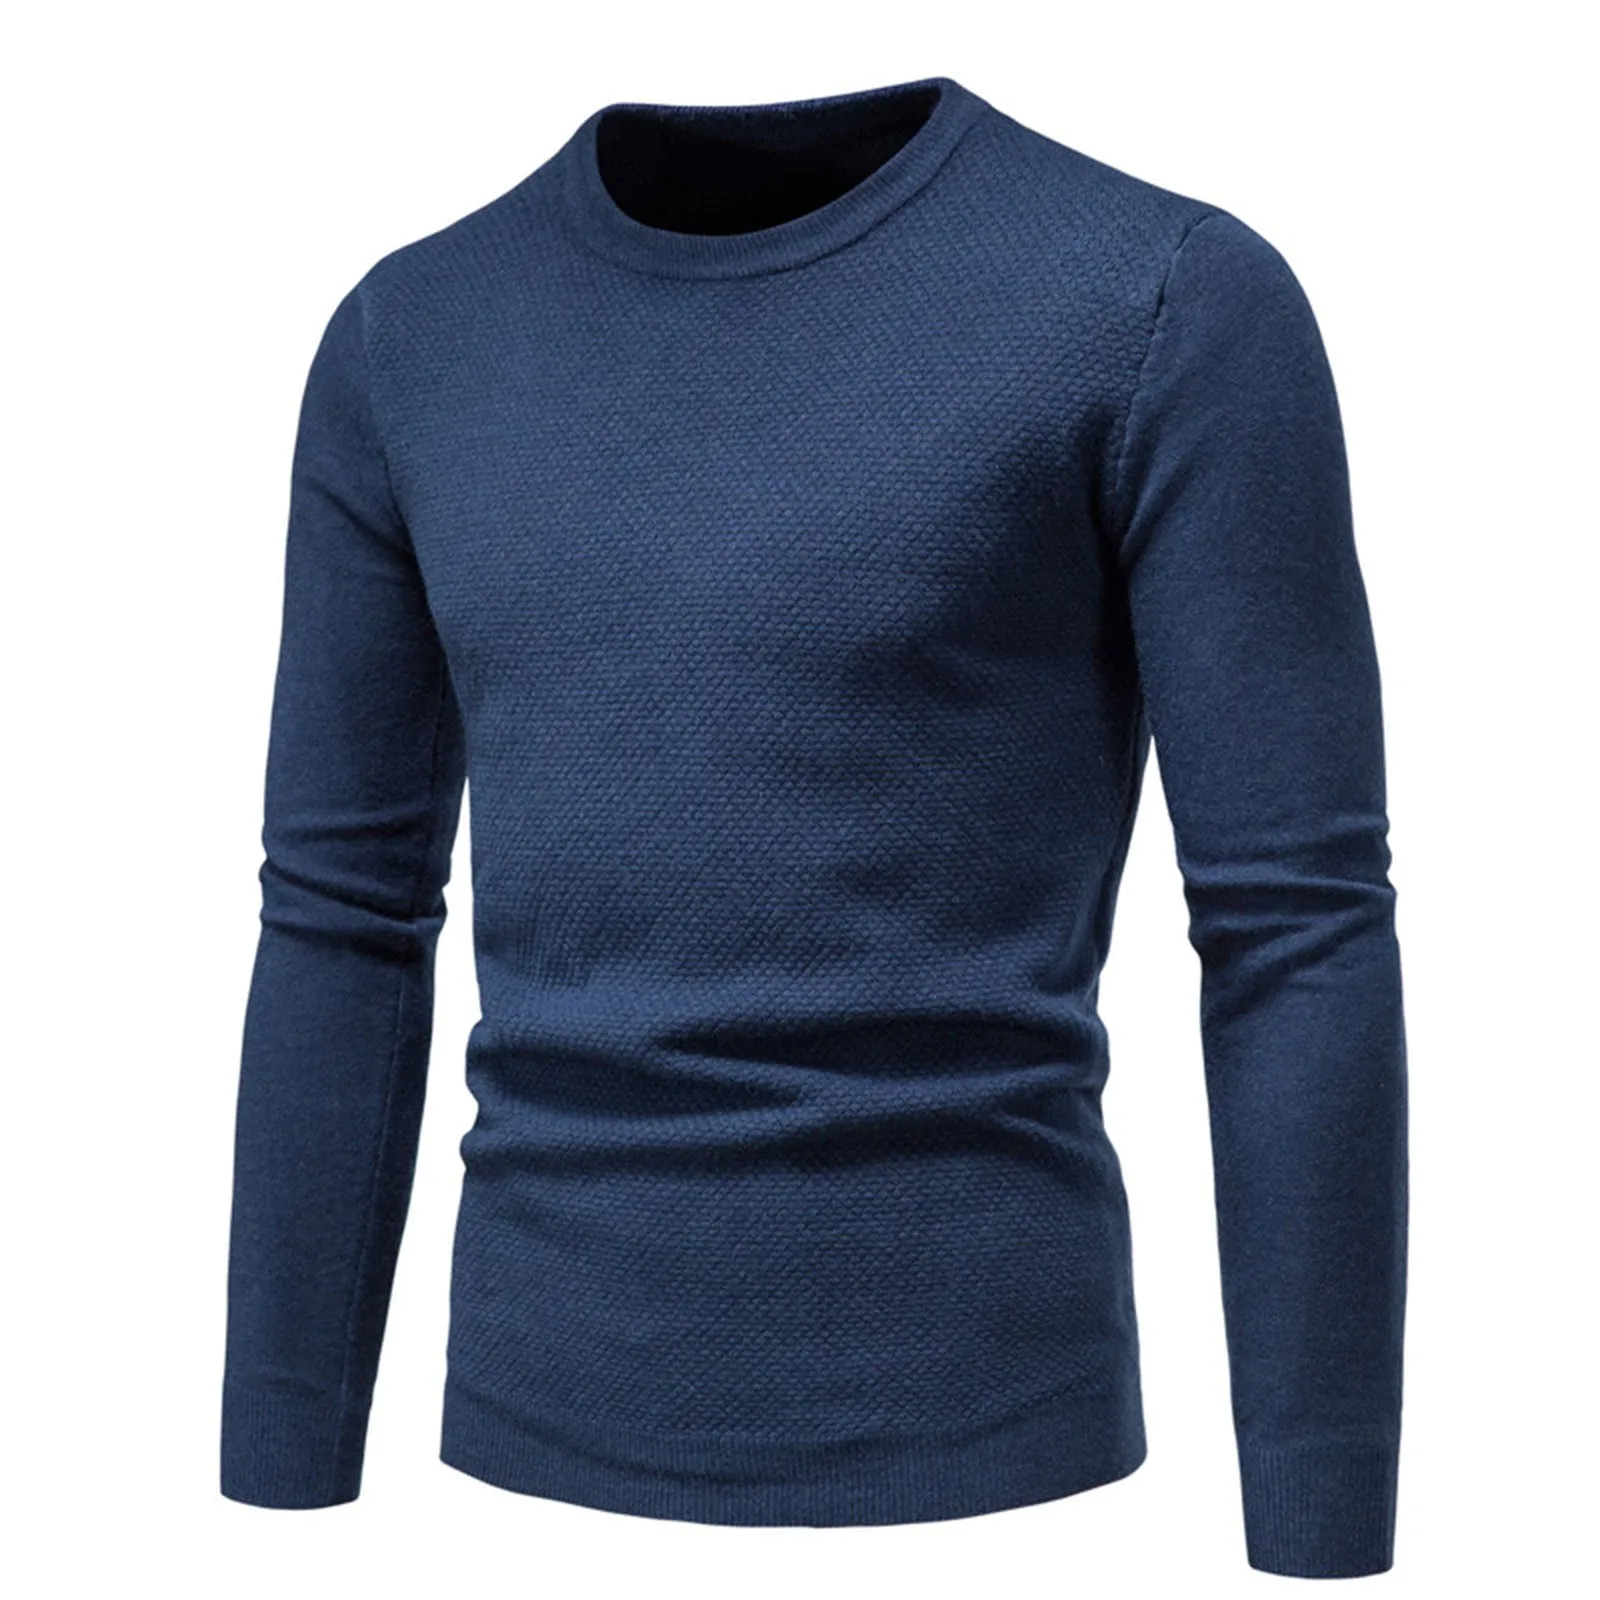 

Mens Knitted Shirt Fashion Multi Color Large Round Neck Slim Fit Sweater Underlay Pullover Tees Retro Style